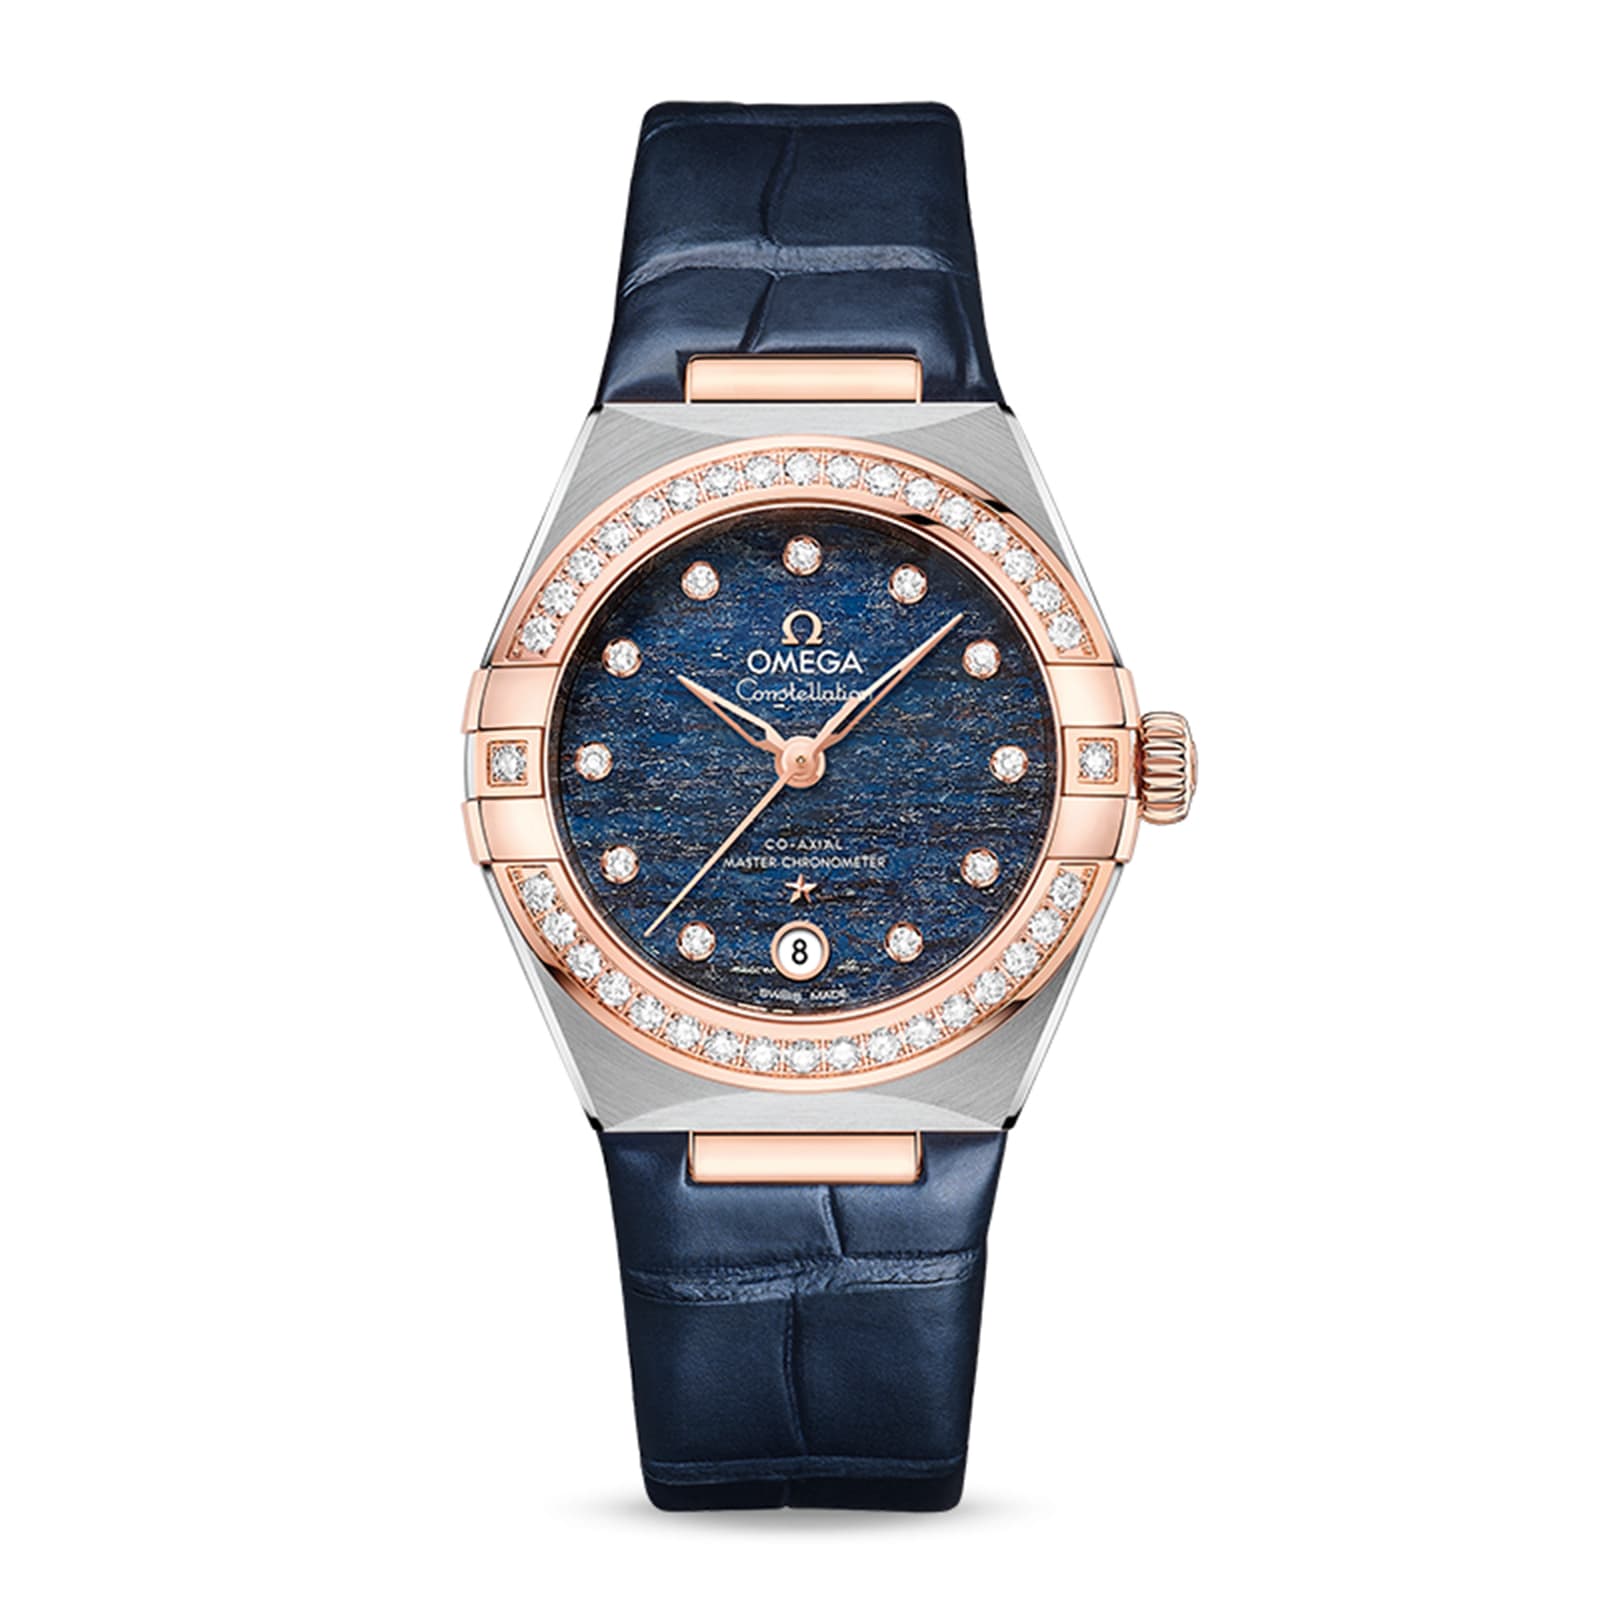 Constellation Co-Axial Master Chronometer 29mm Ladies Watch Blue